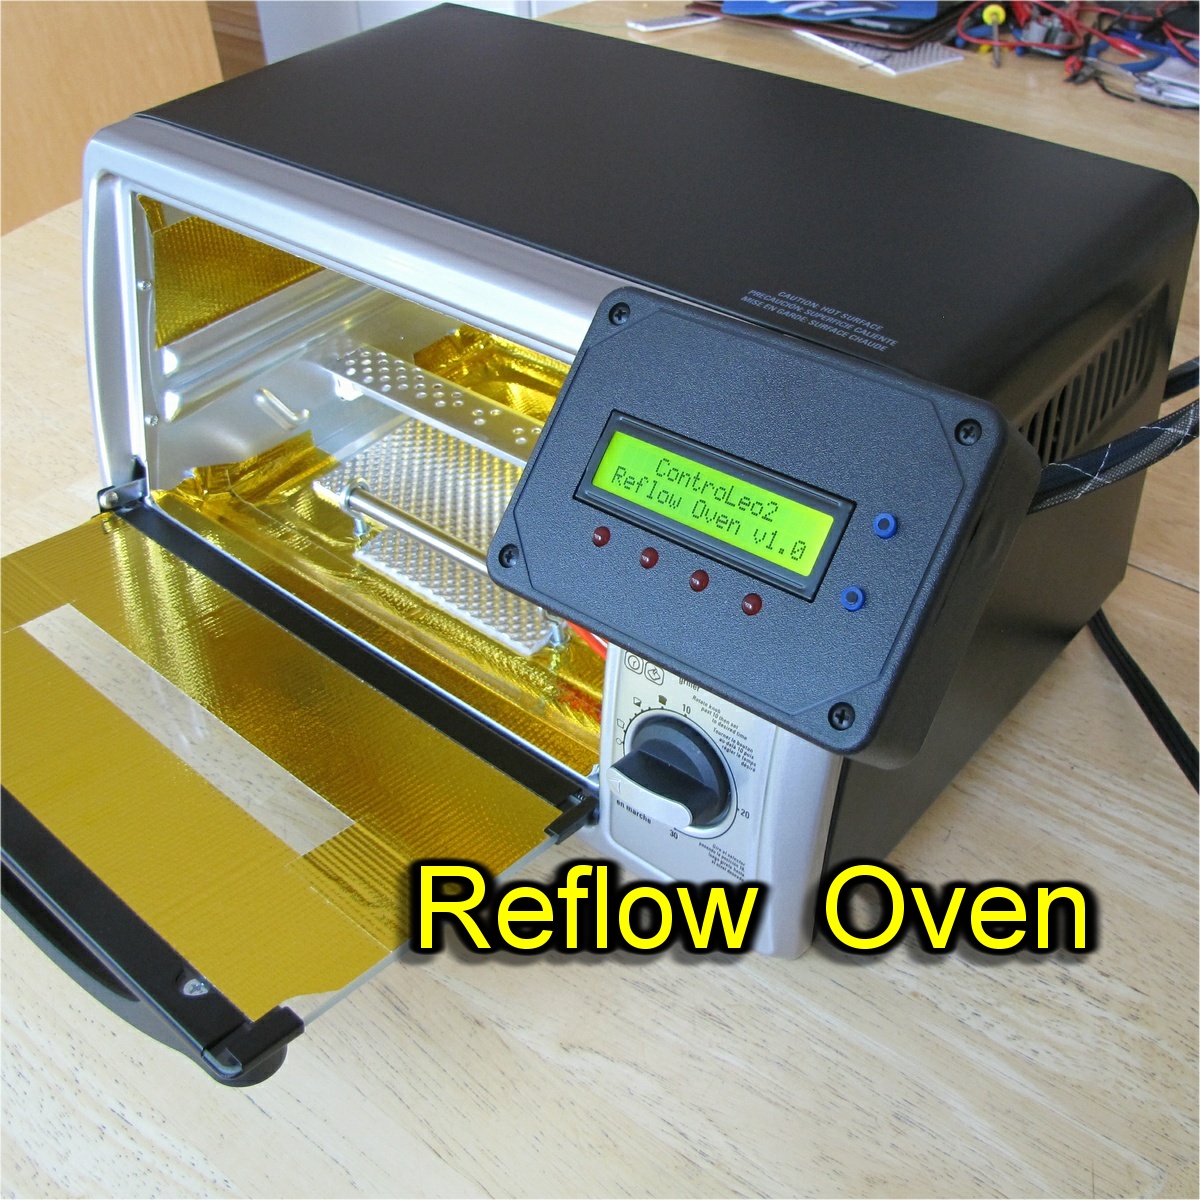 Build your own reflow oven